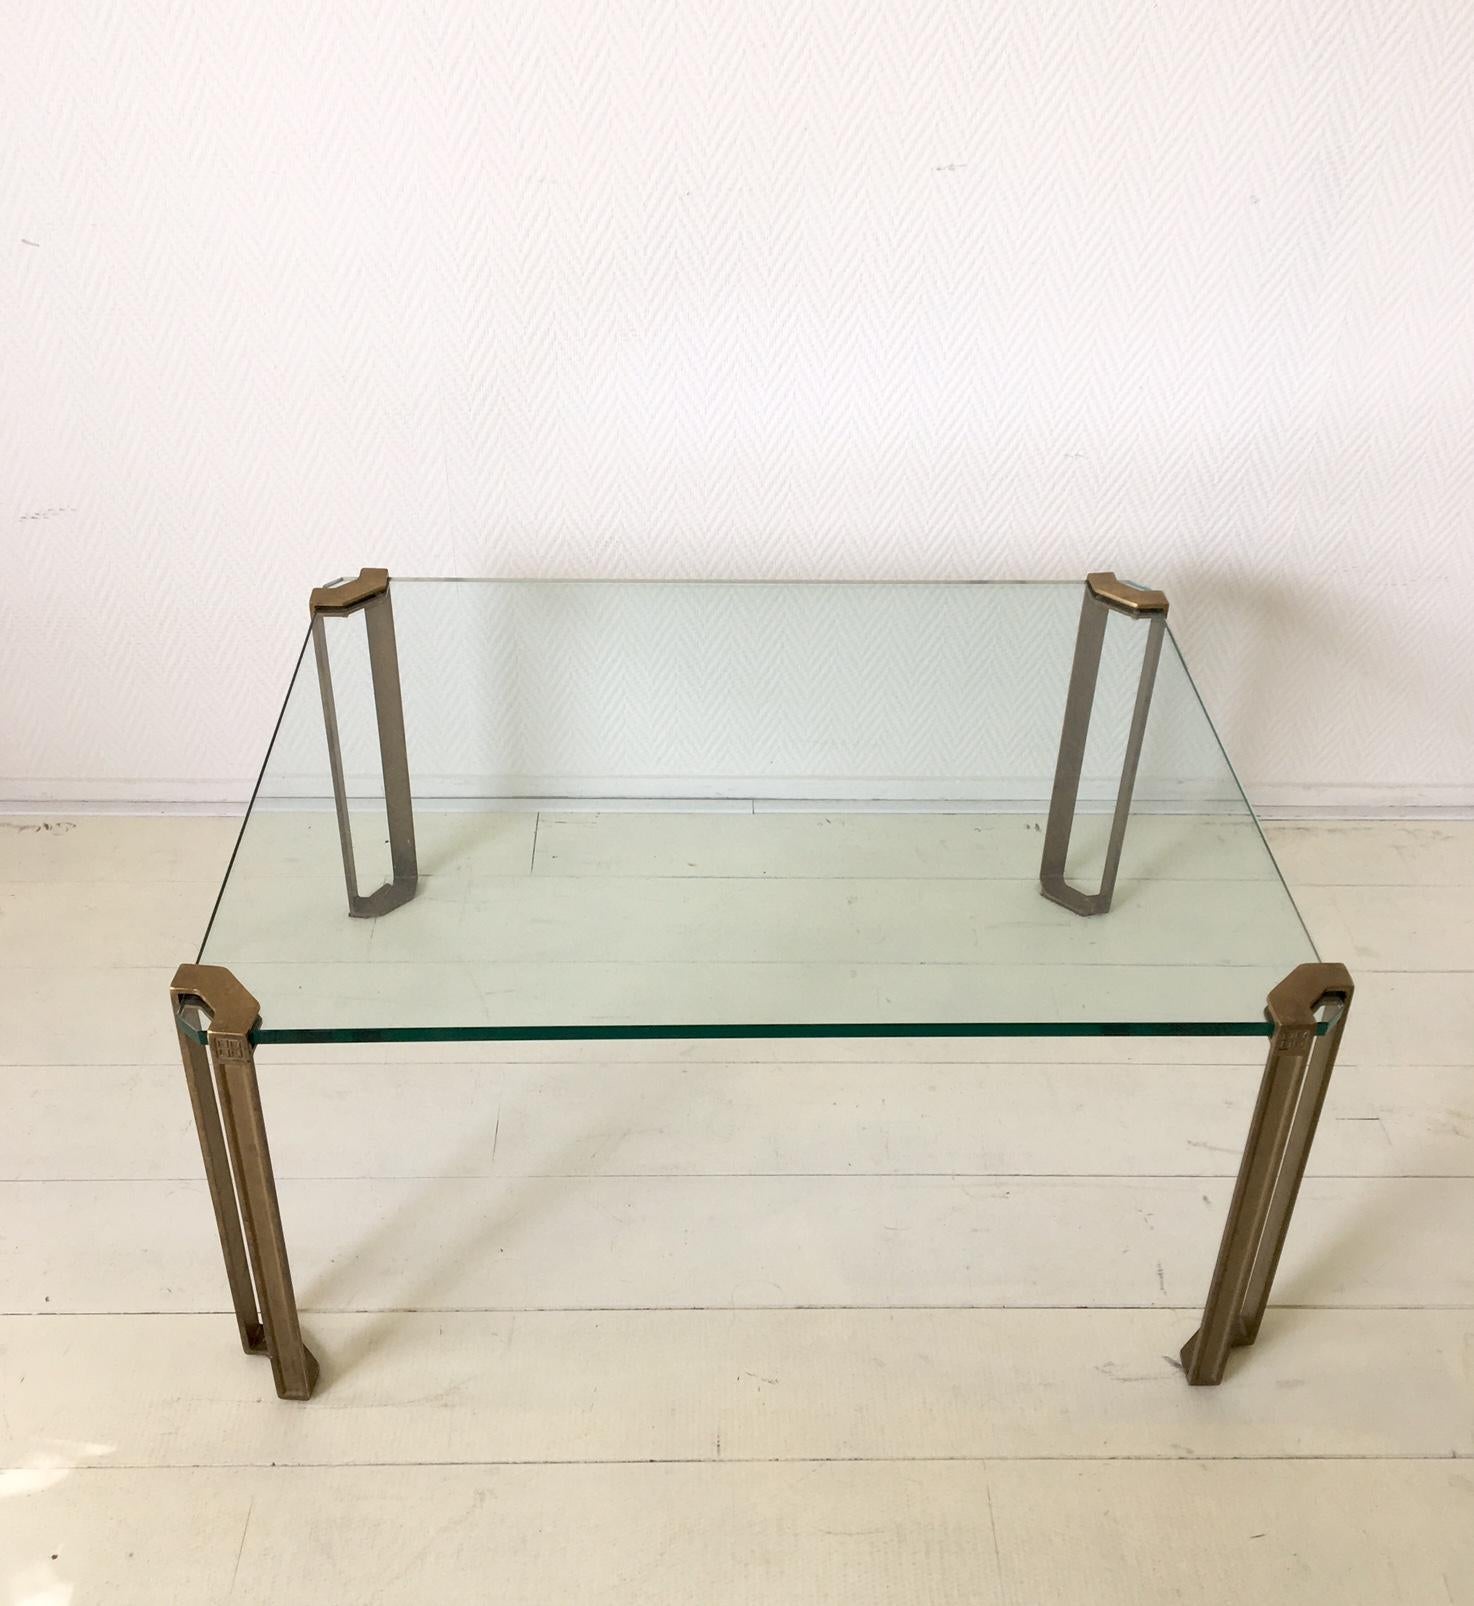 This coffee table was manufactured by Peter Ghyczy in the Netherlands, circa 1970s. It features four brass legs, and a thick glass surface. The piece remains in wonderful condition with normal signs of age and use. Not in production anymore. Easy